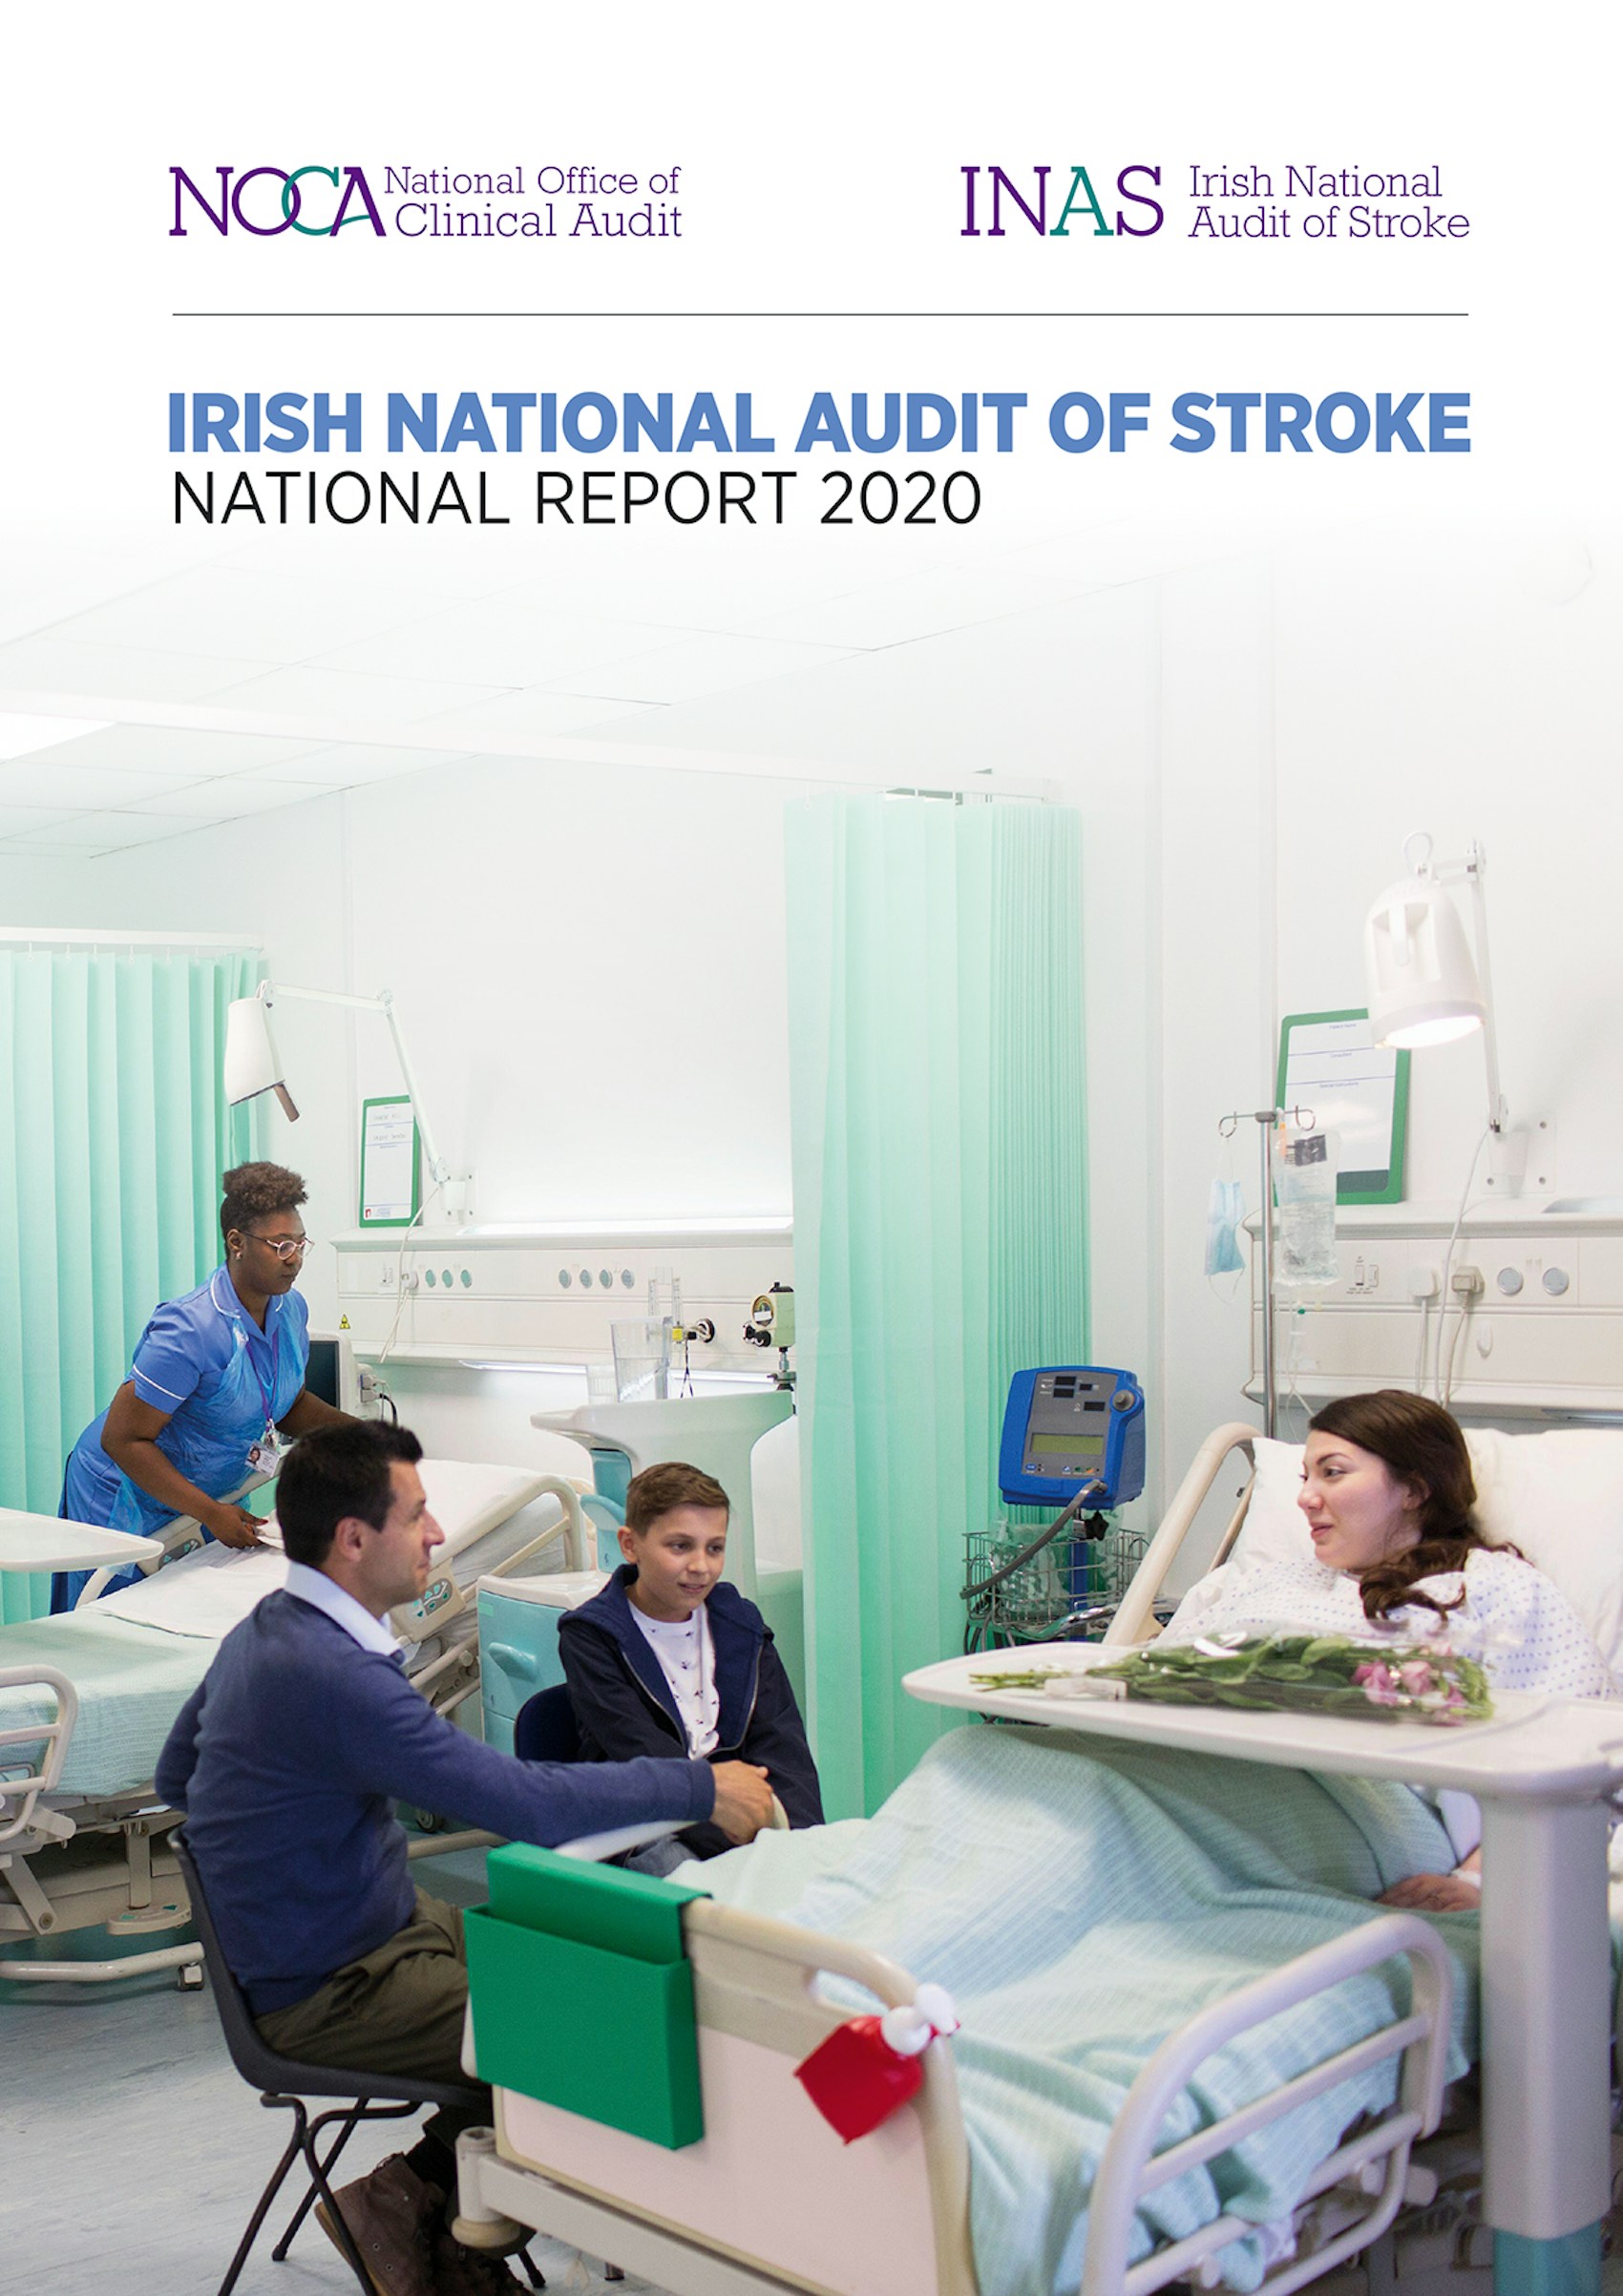 ‘Time is Brain’ - Key message from Stroke Report launch